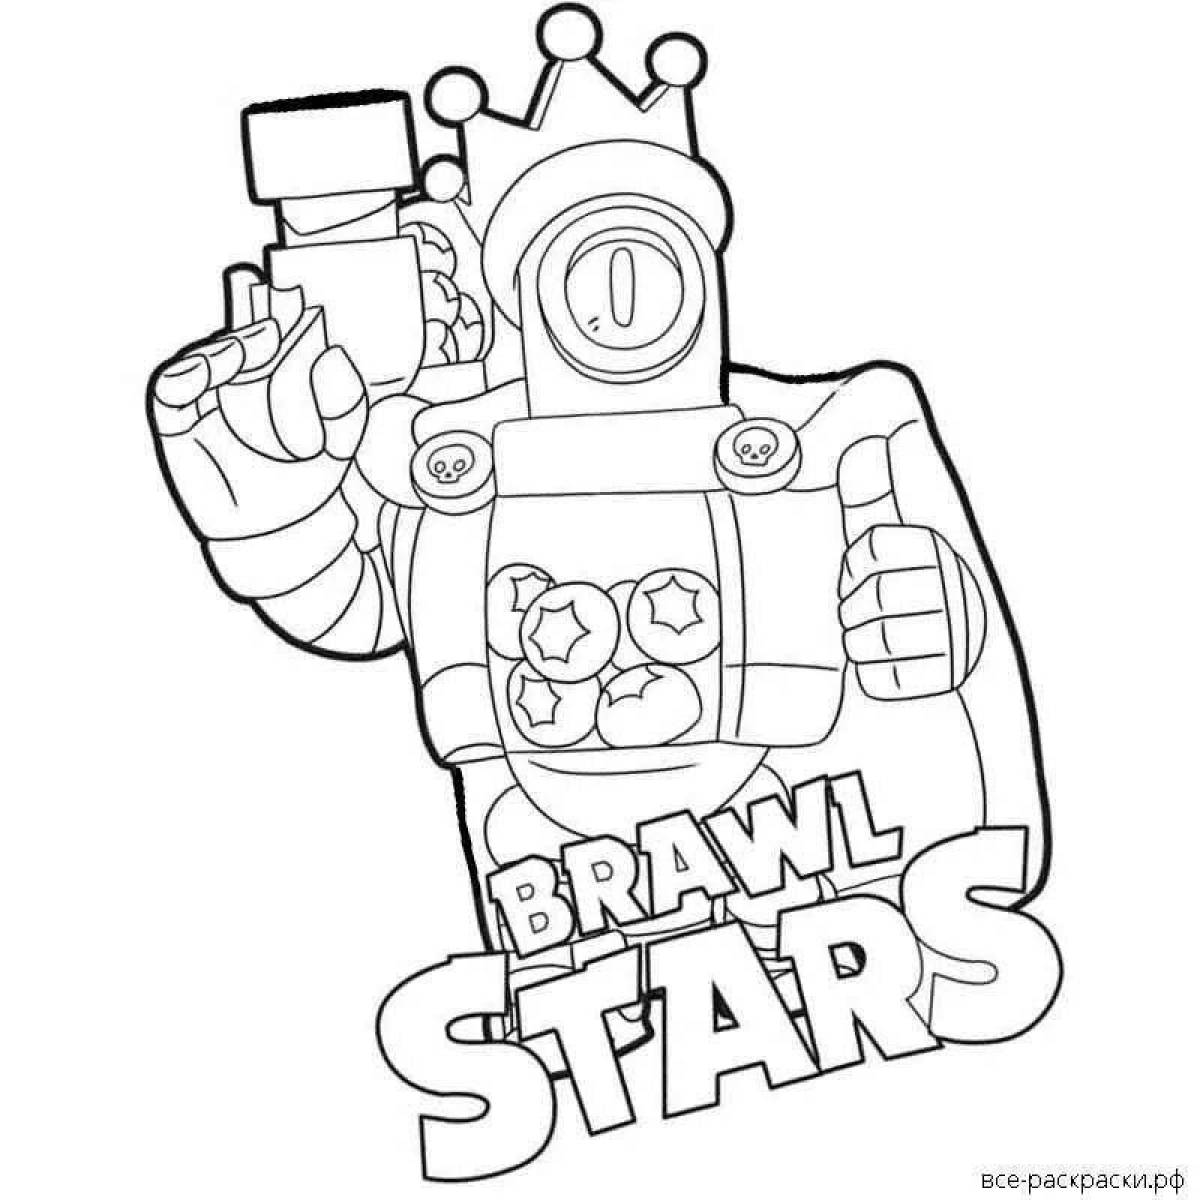 Awesome stickers bravo stars coloring book